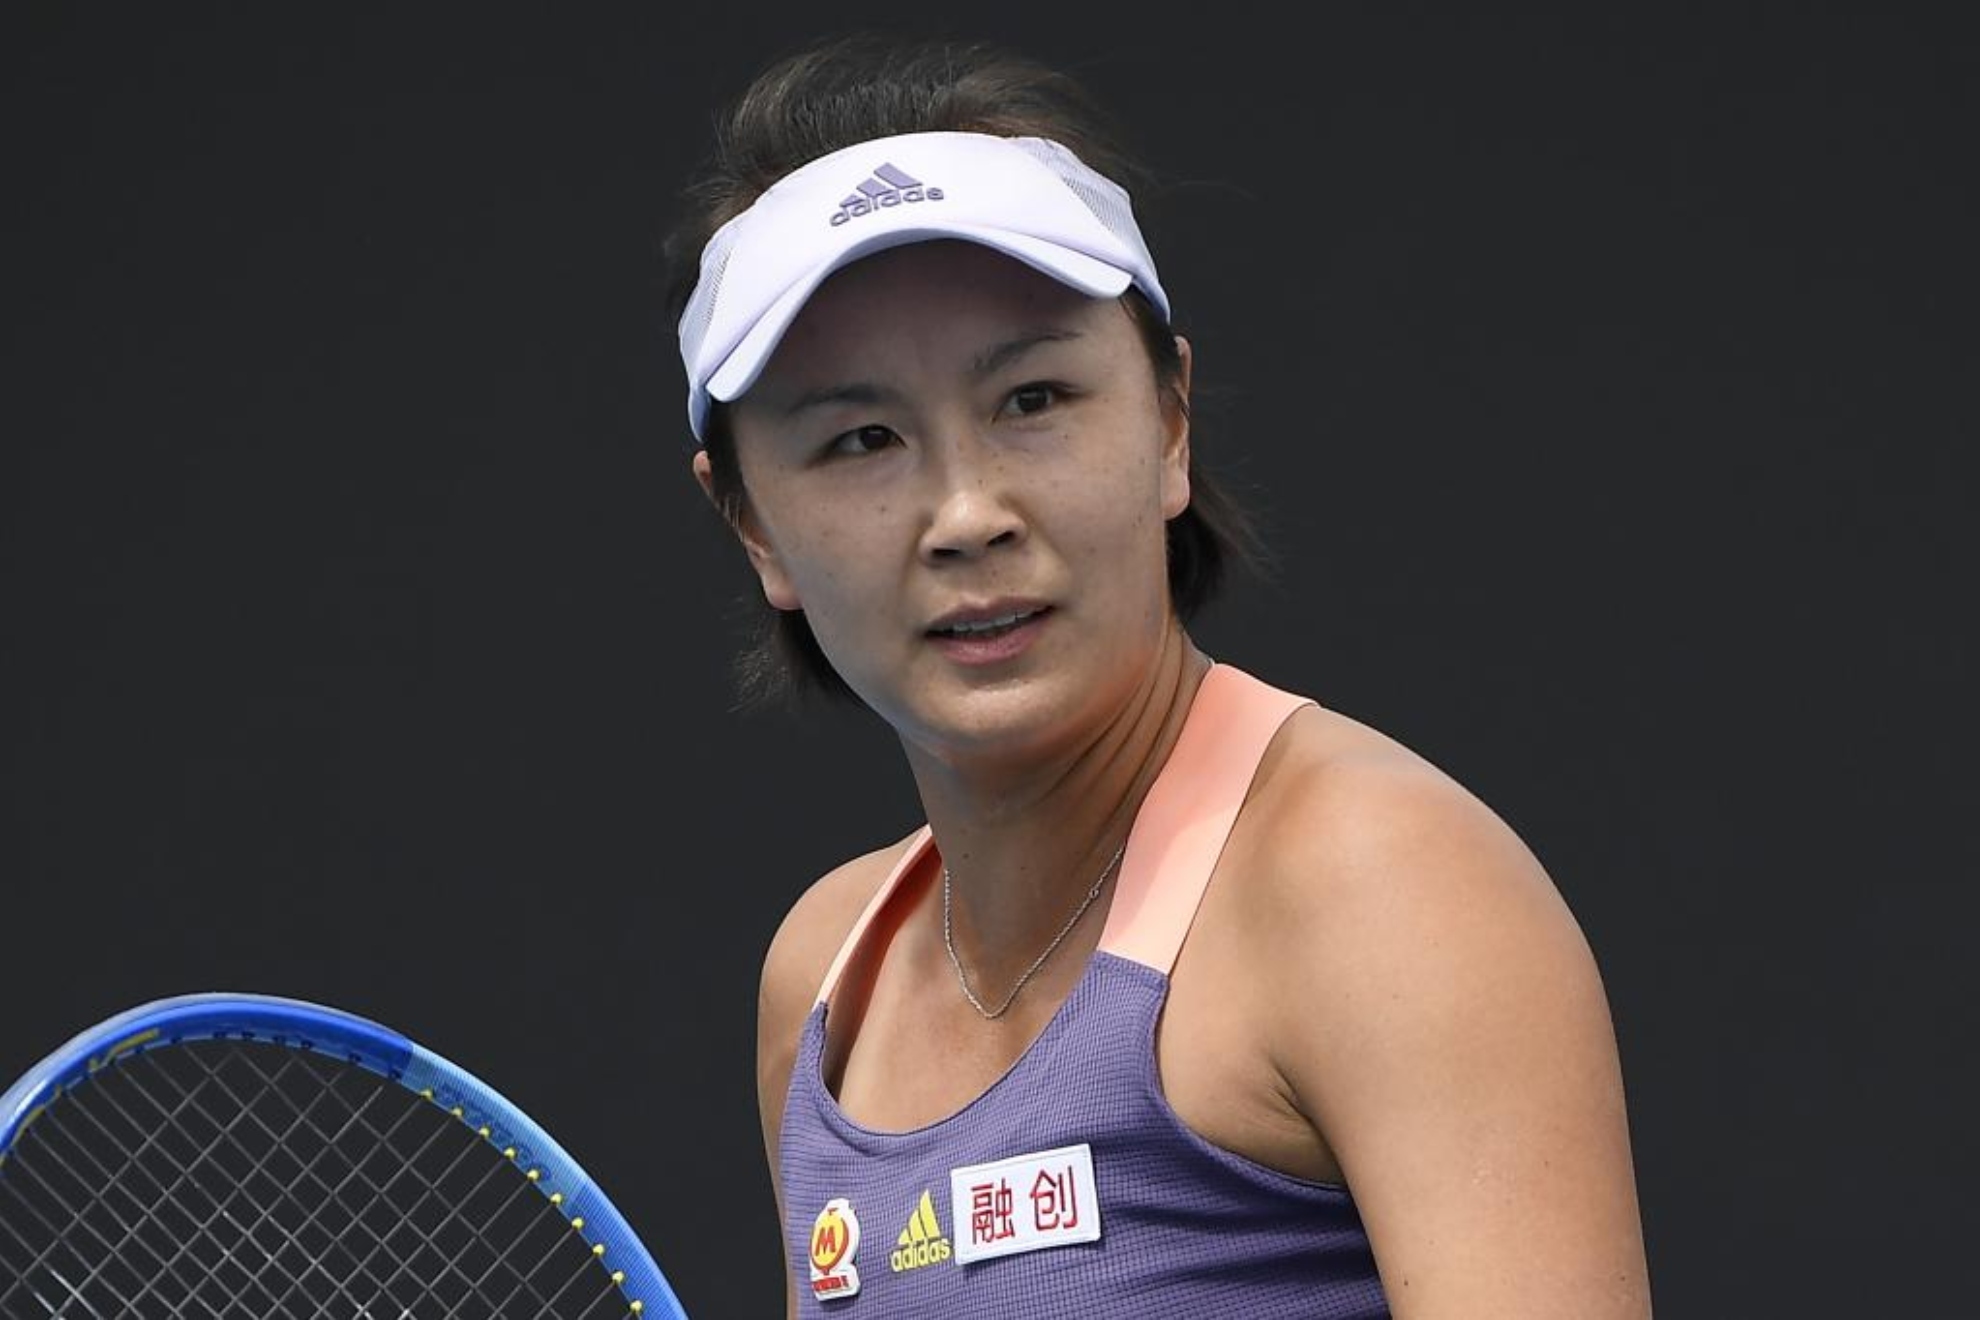 WTA director assures Peng Shuai is safe: We know where she is